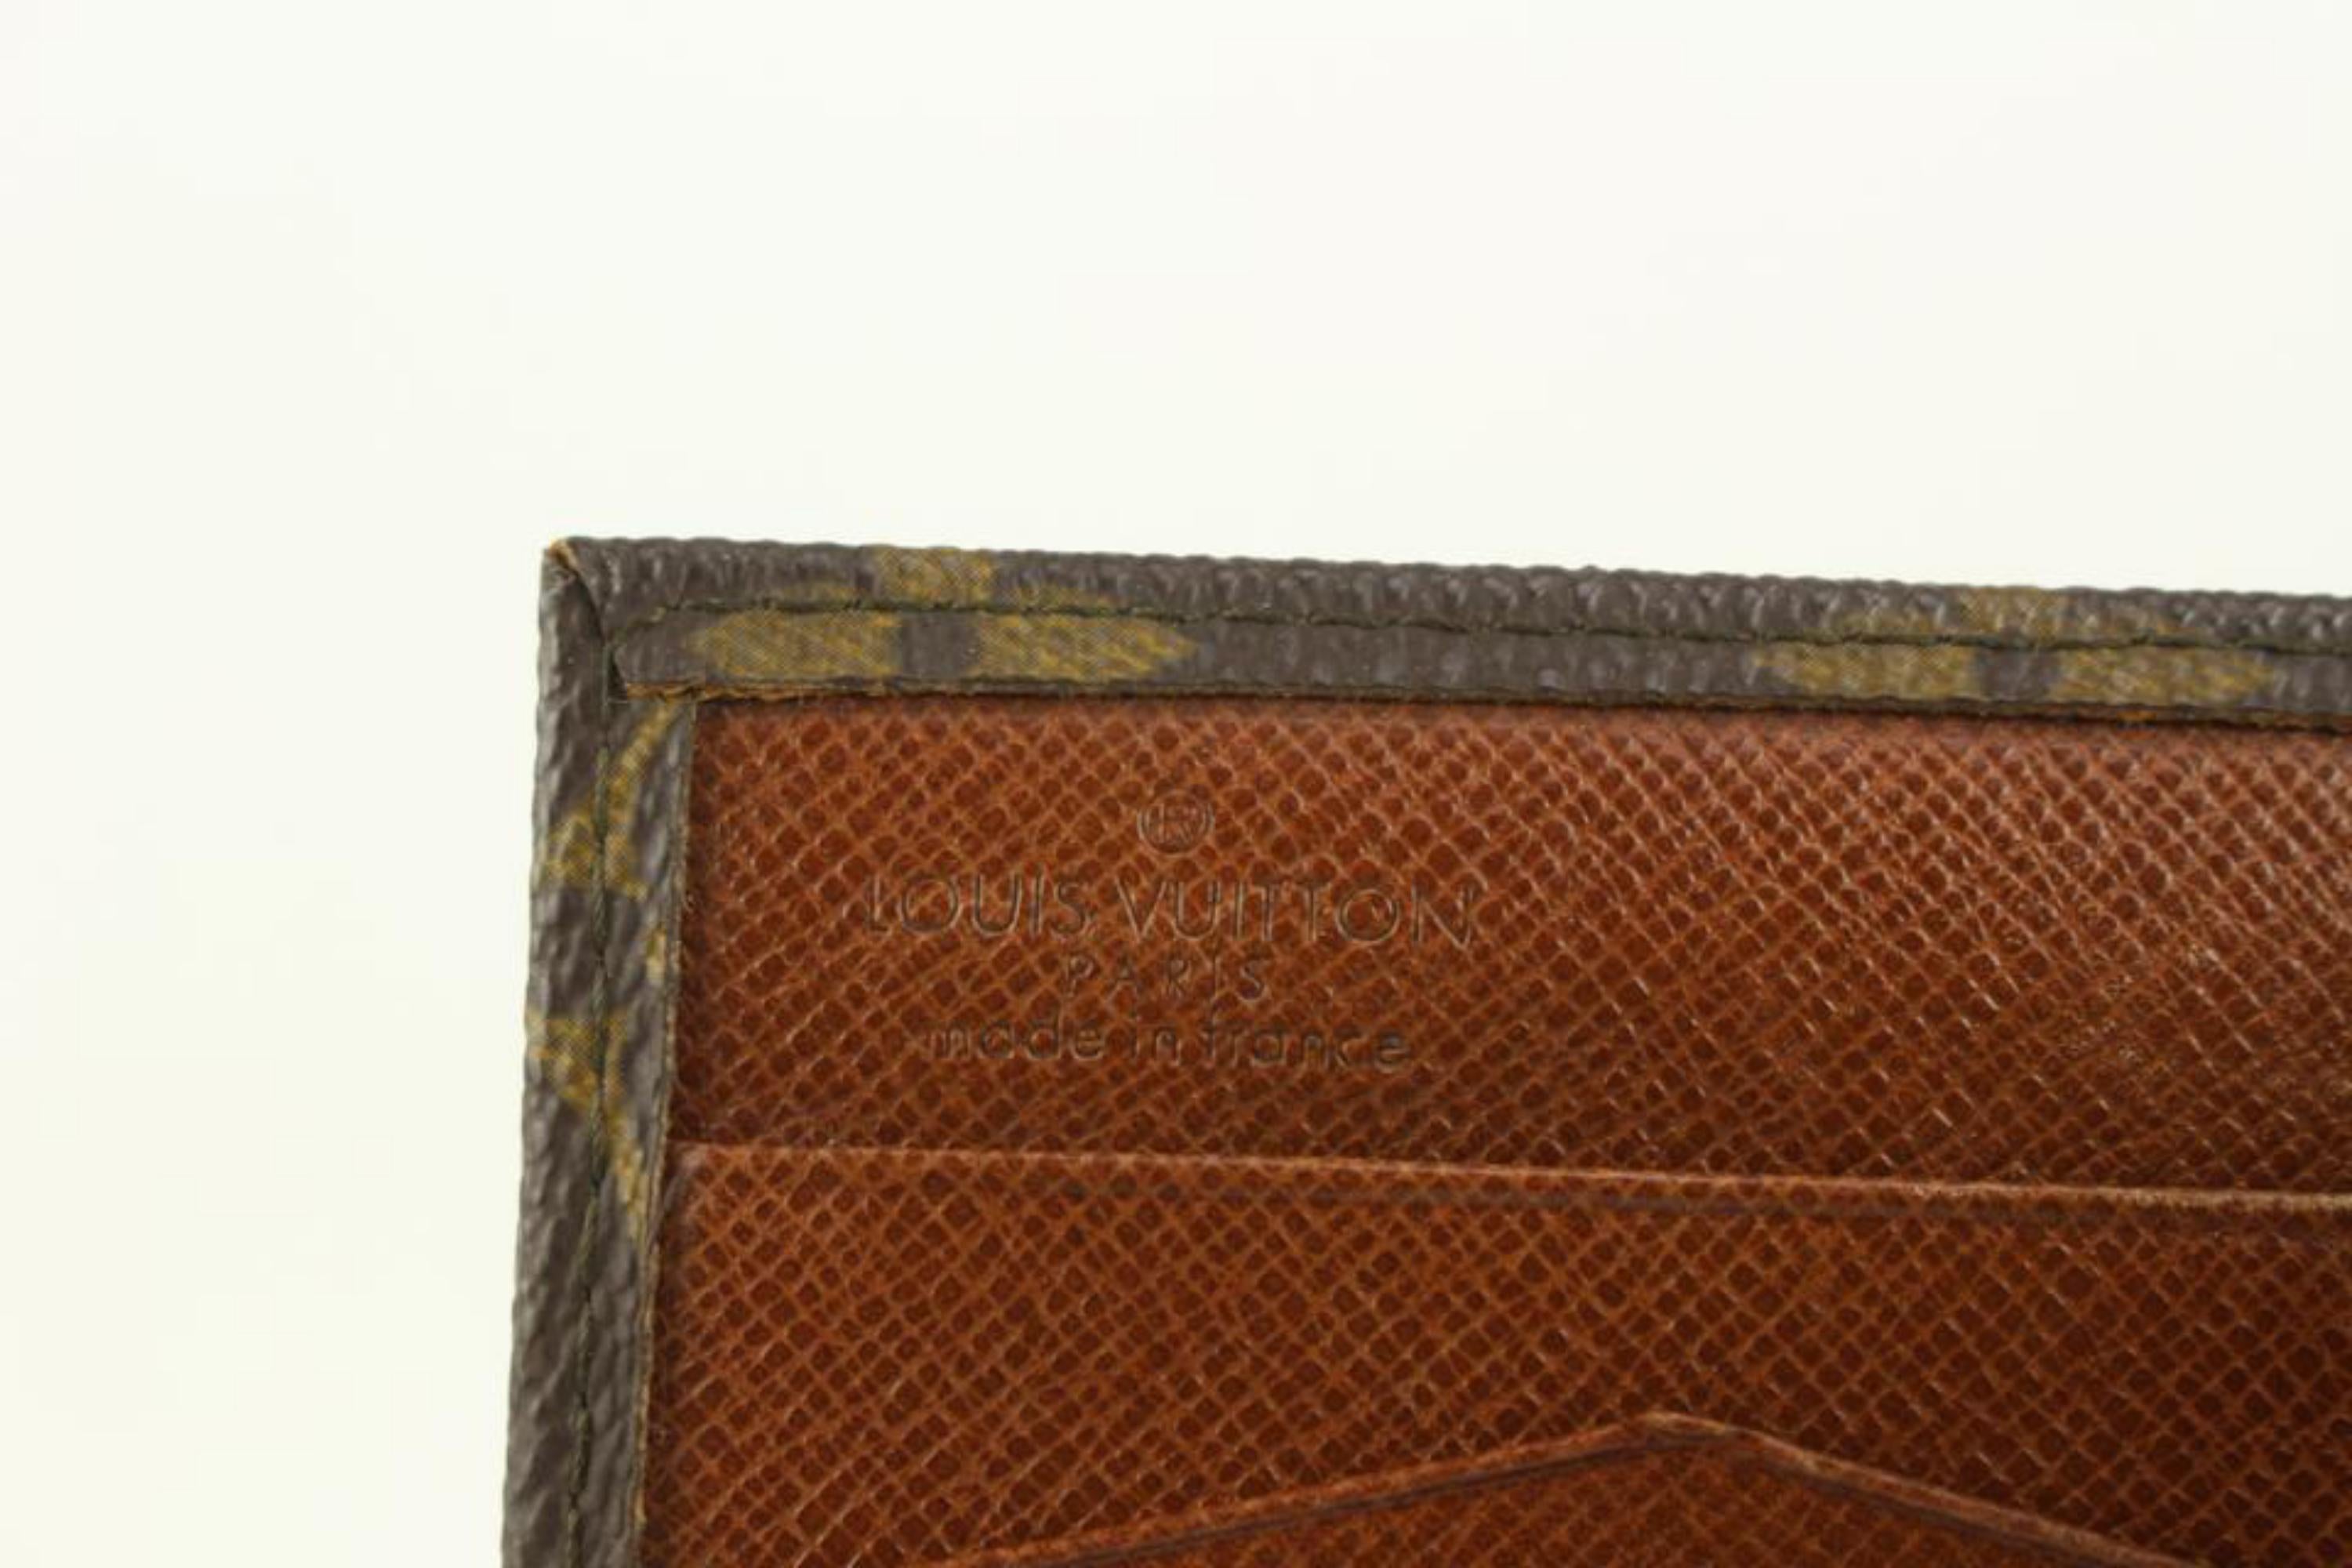 Louis Vuitton Monogram Elise Compact Wallet 1217lv21 In Good Condition For Sale In Dix hills, NY